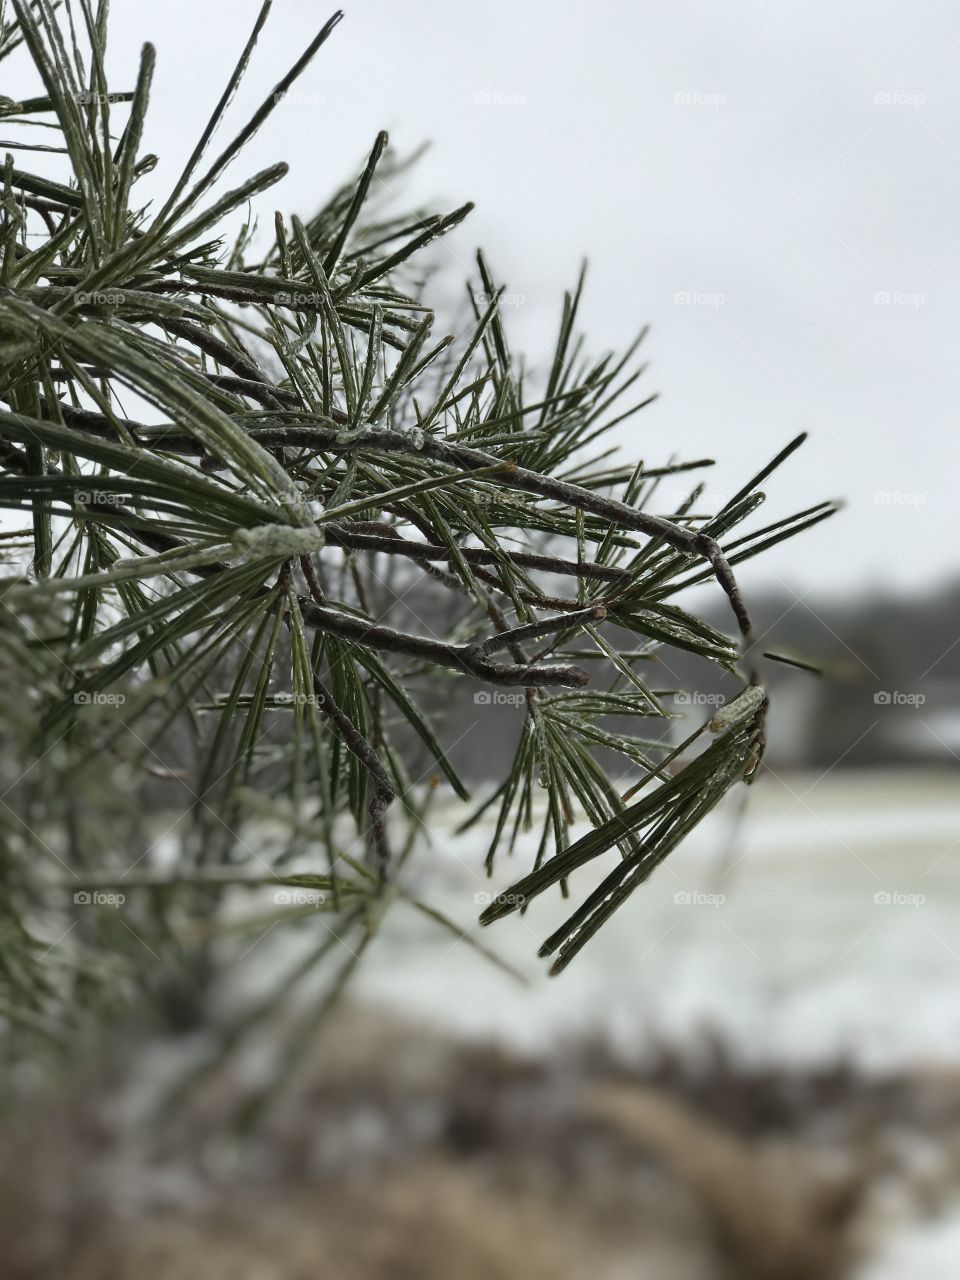 Green pine needles covered in a layer of ice after freezing rain in the middle of the winter season